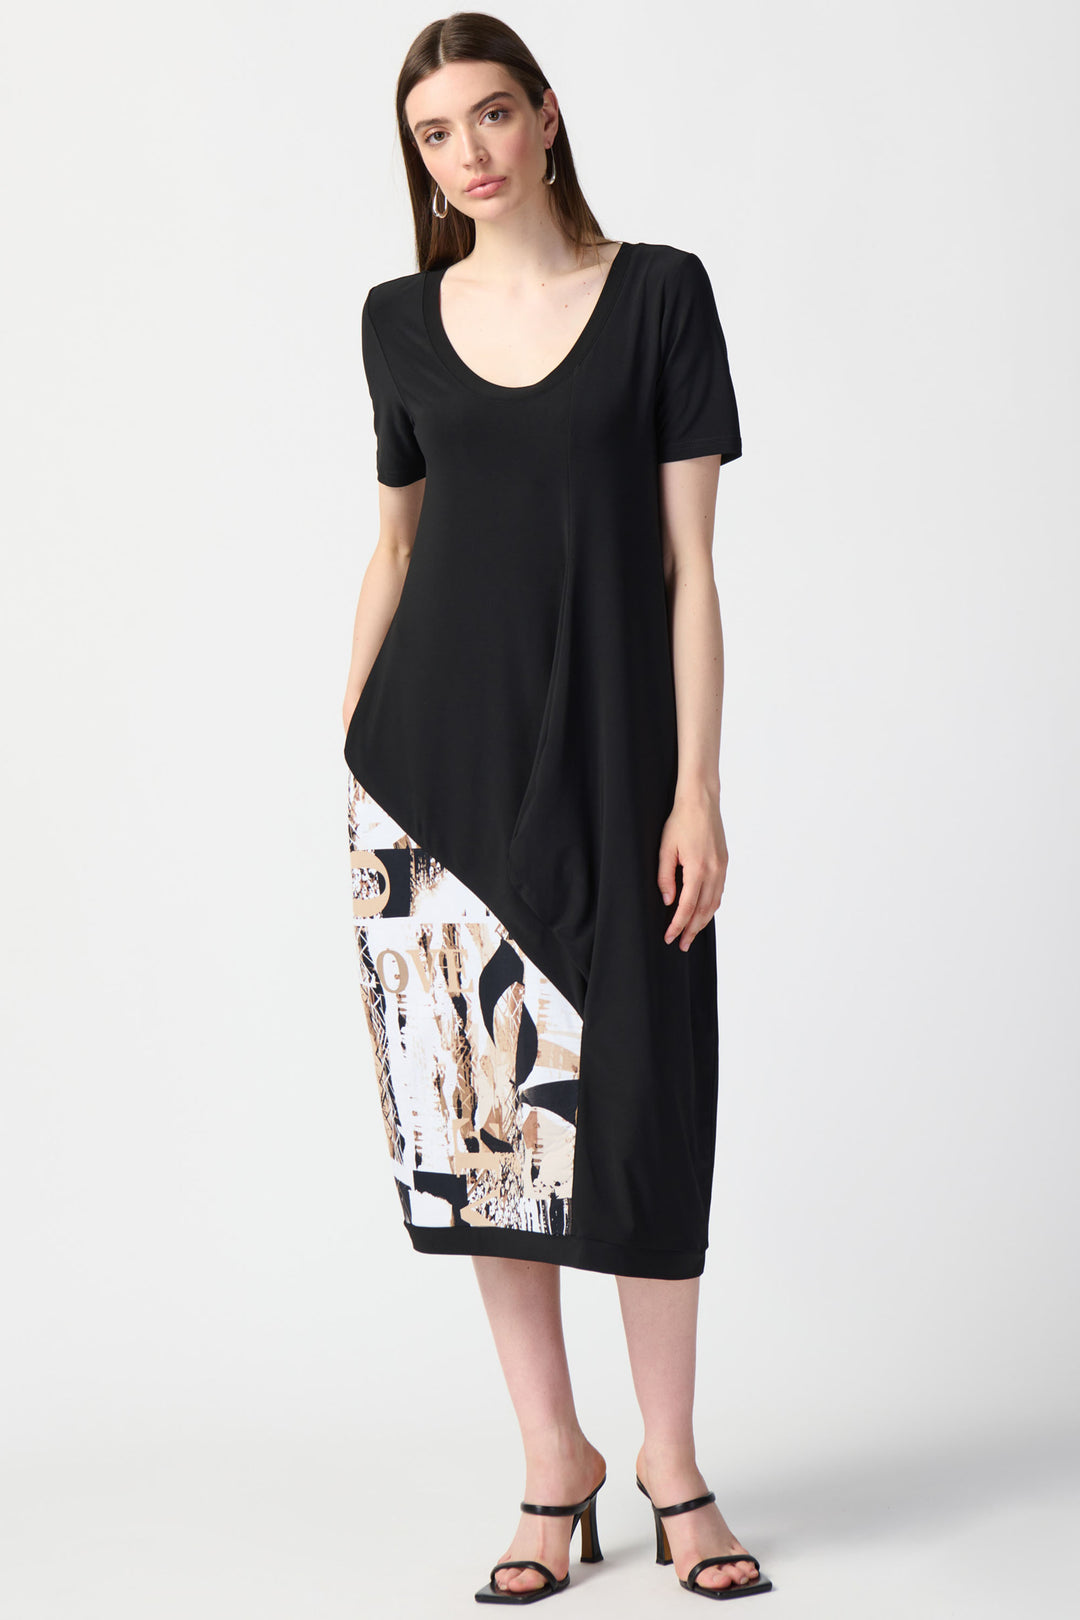 This bold yet simple Cocoon Dress features a relaxed fit, midi-length and round neck design. 